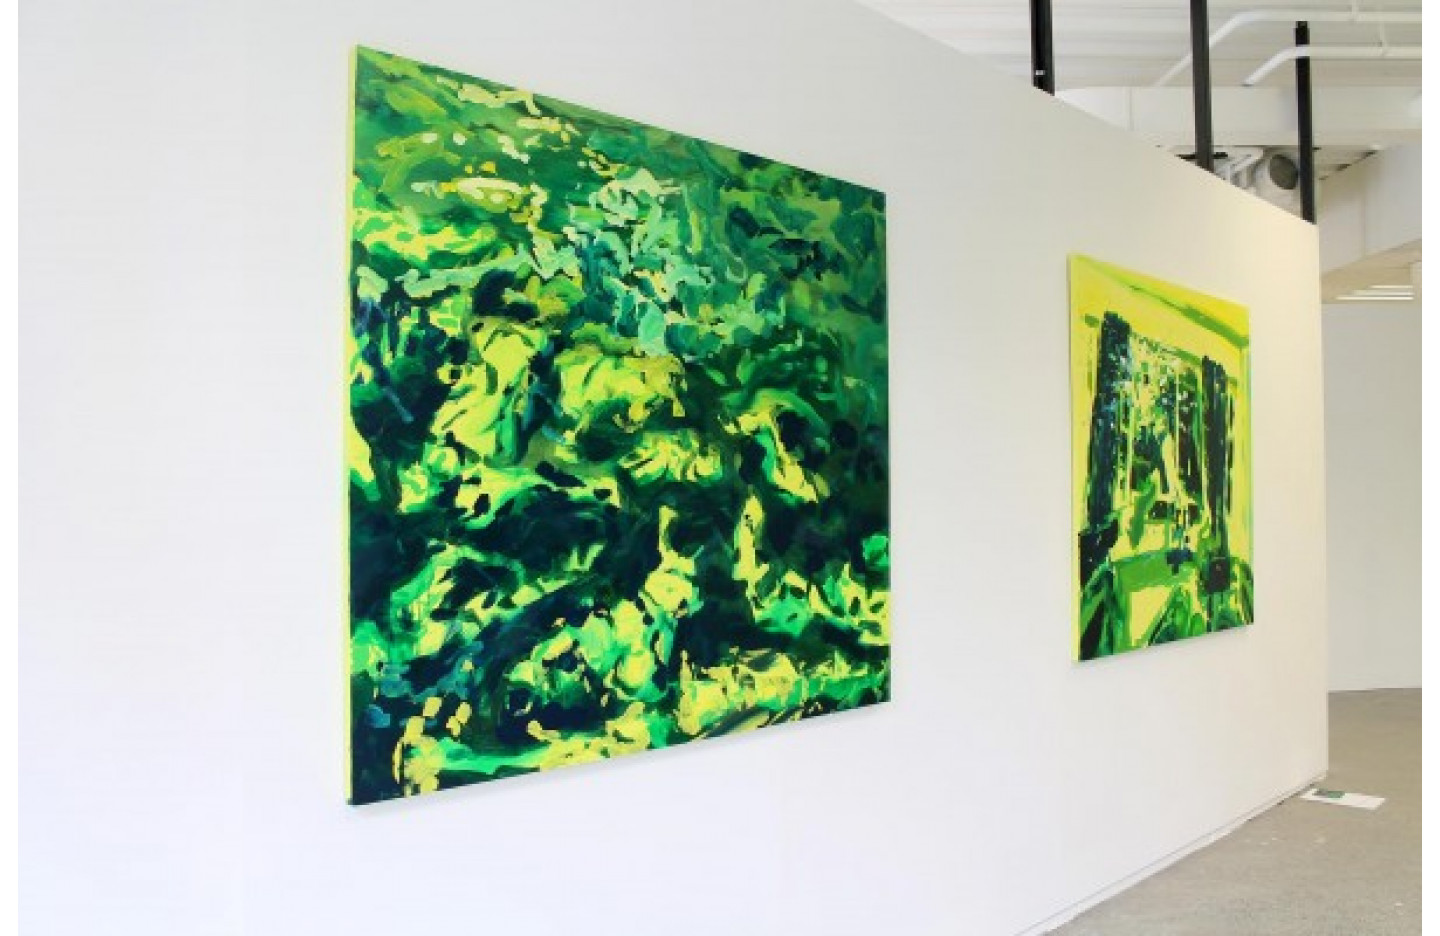 Danielle Foster, Out of Place, Masters Final Exhibition, Installation view 3